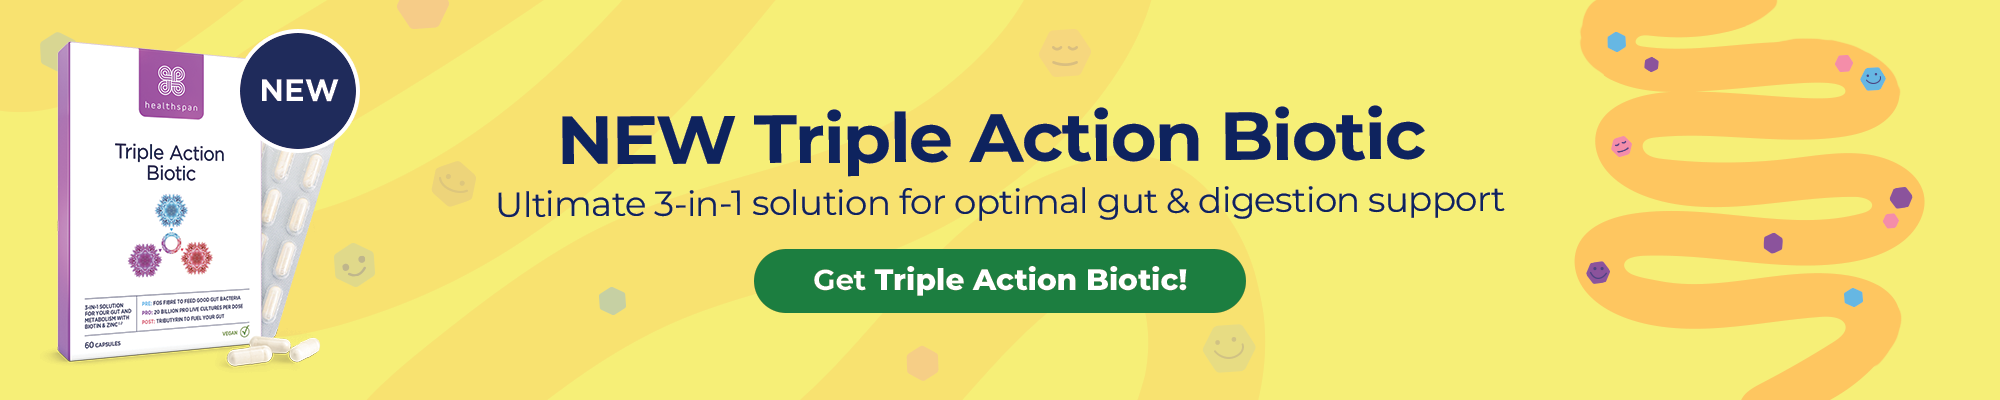 NEW! Triple Action Biotic. Ultimate 3-in-1 solution for optimal gut and digestion support.